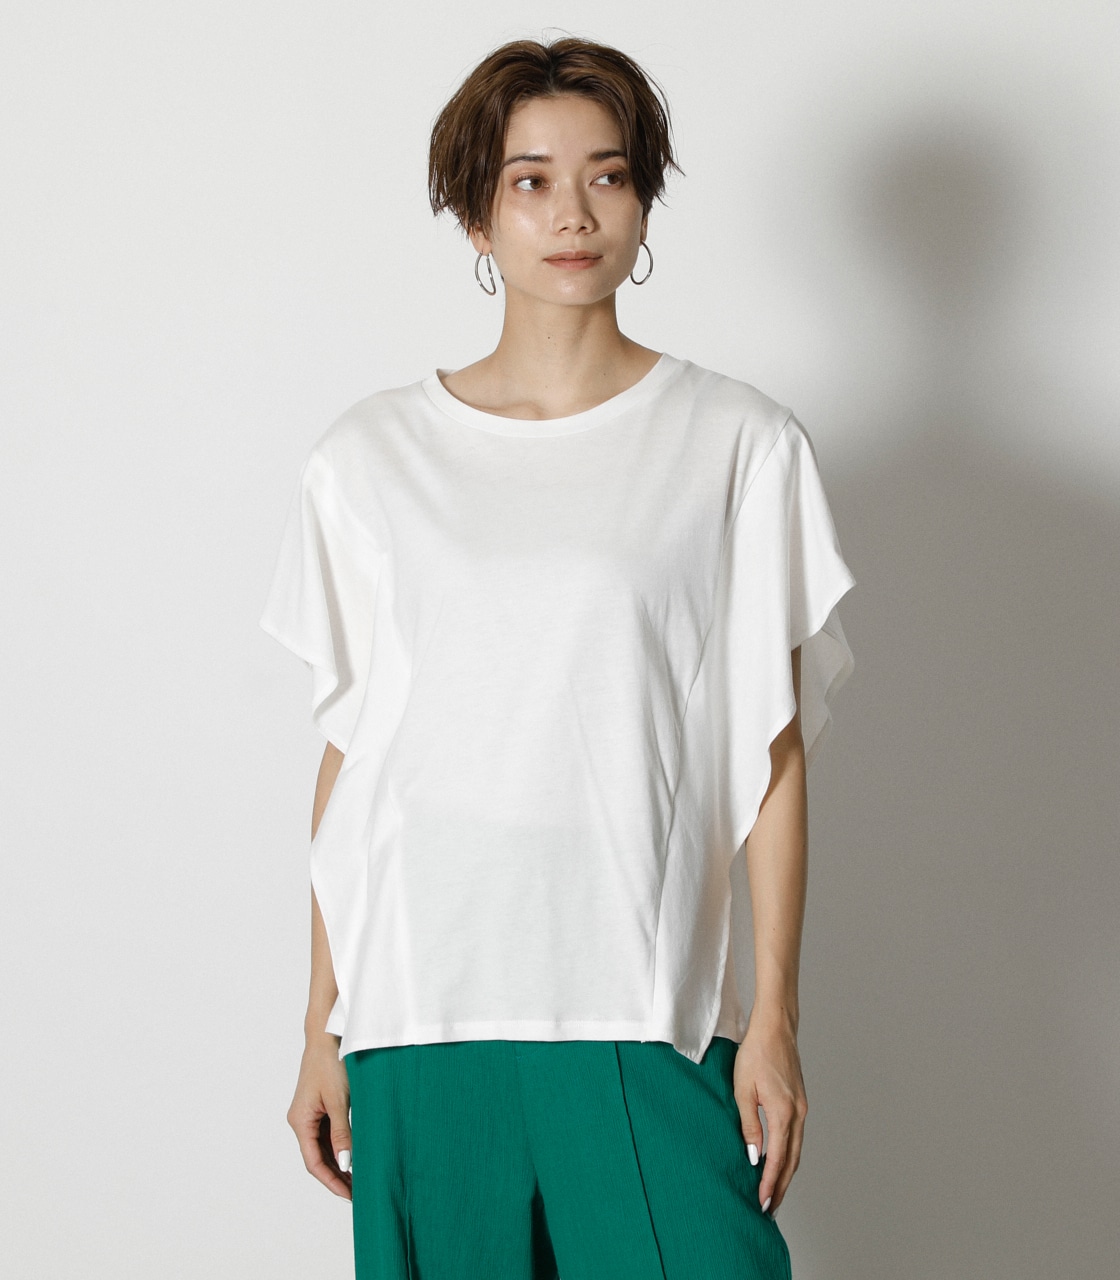 SLEEVE LAYERED TOPS/スリーブレイヤードトップス 詳細画像 O/WHT 5